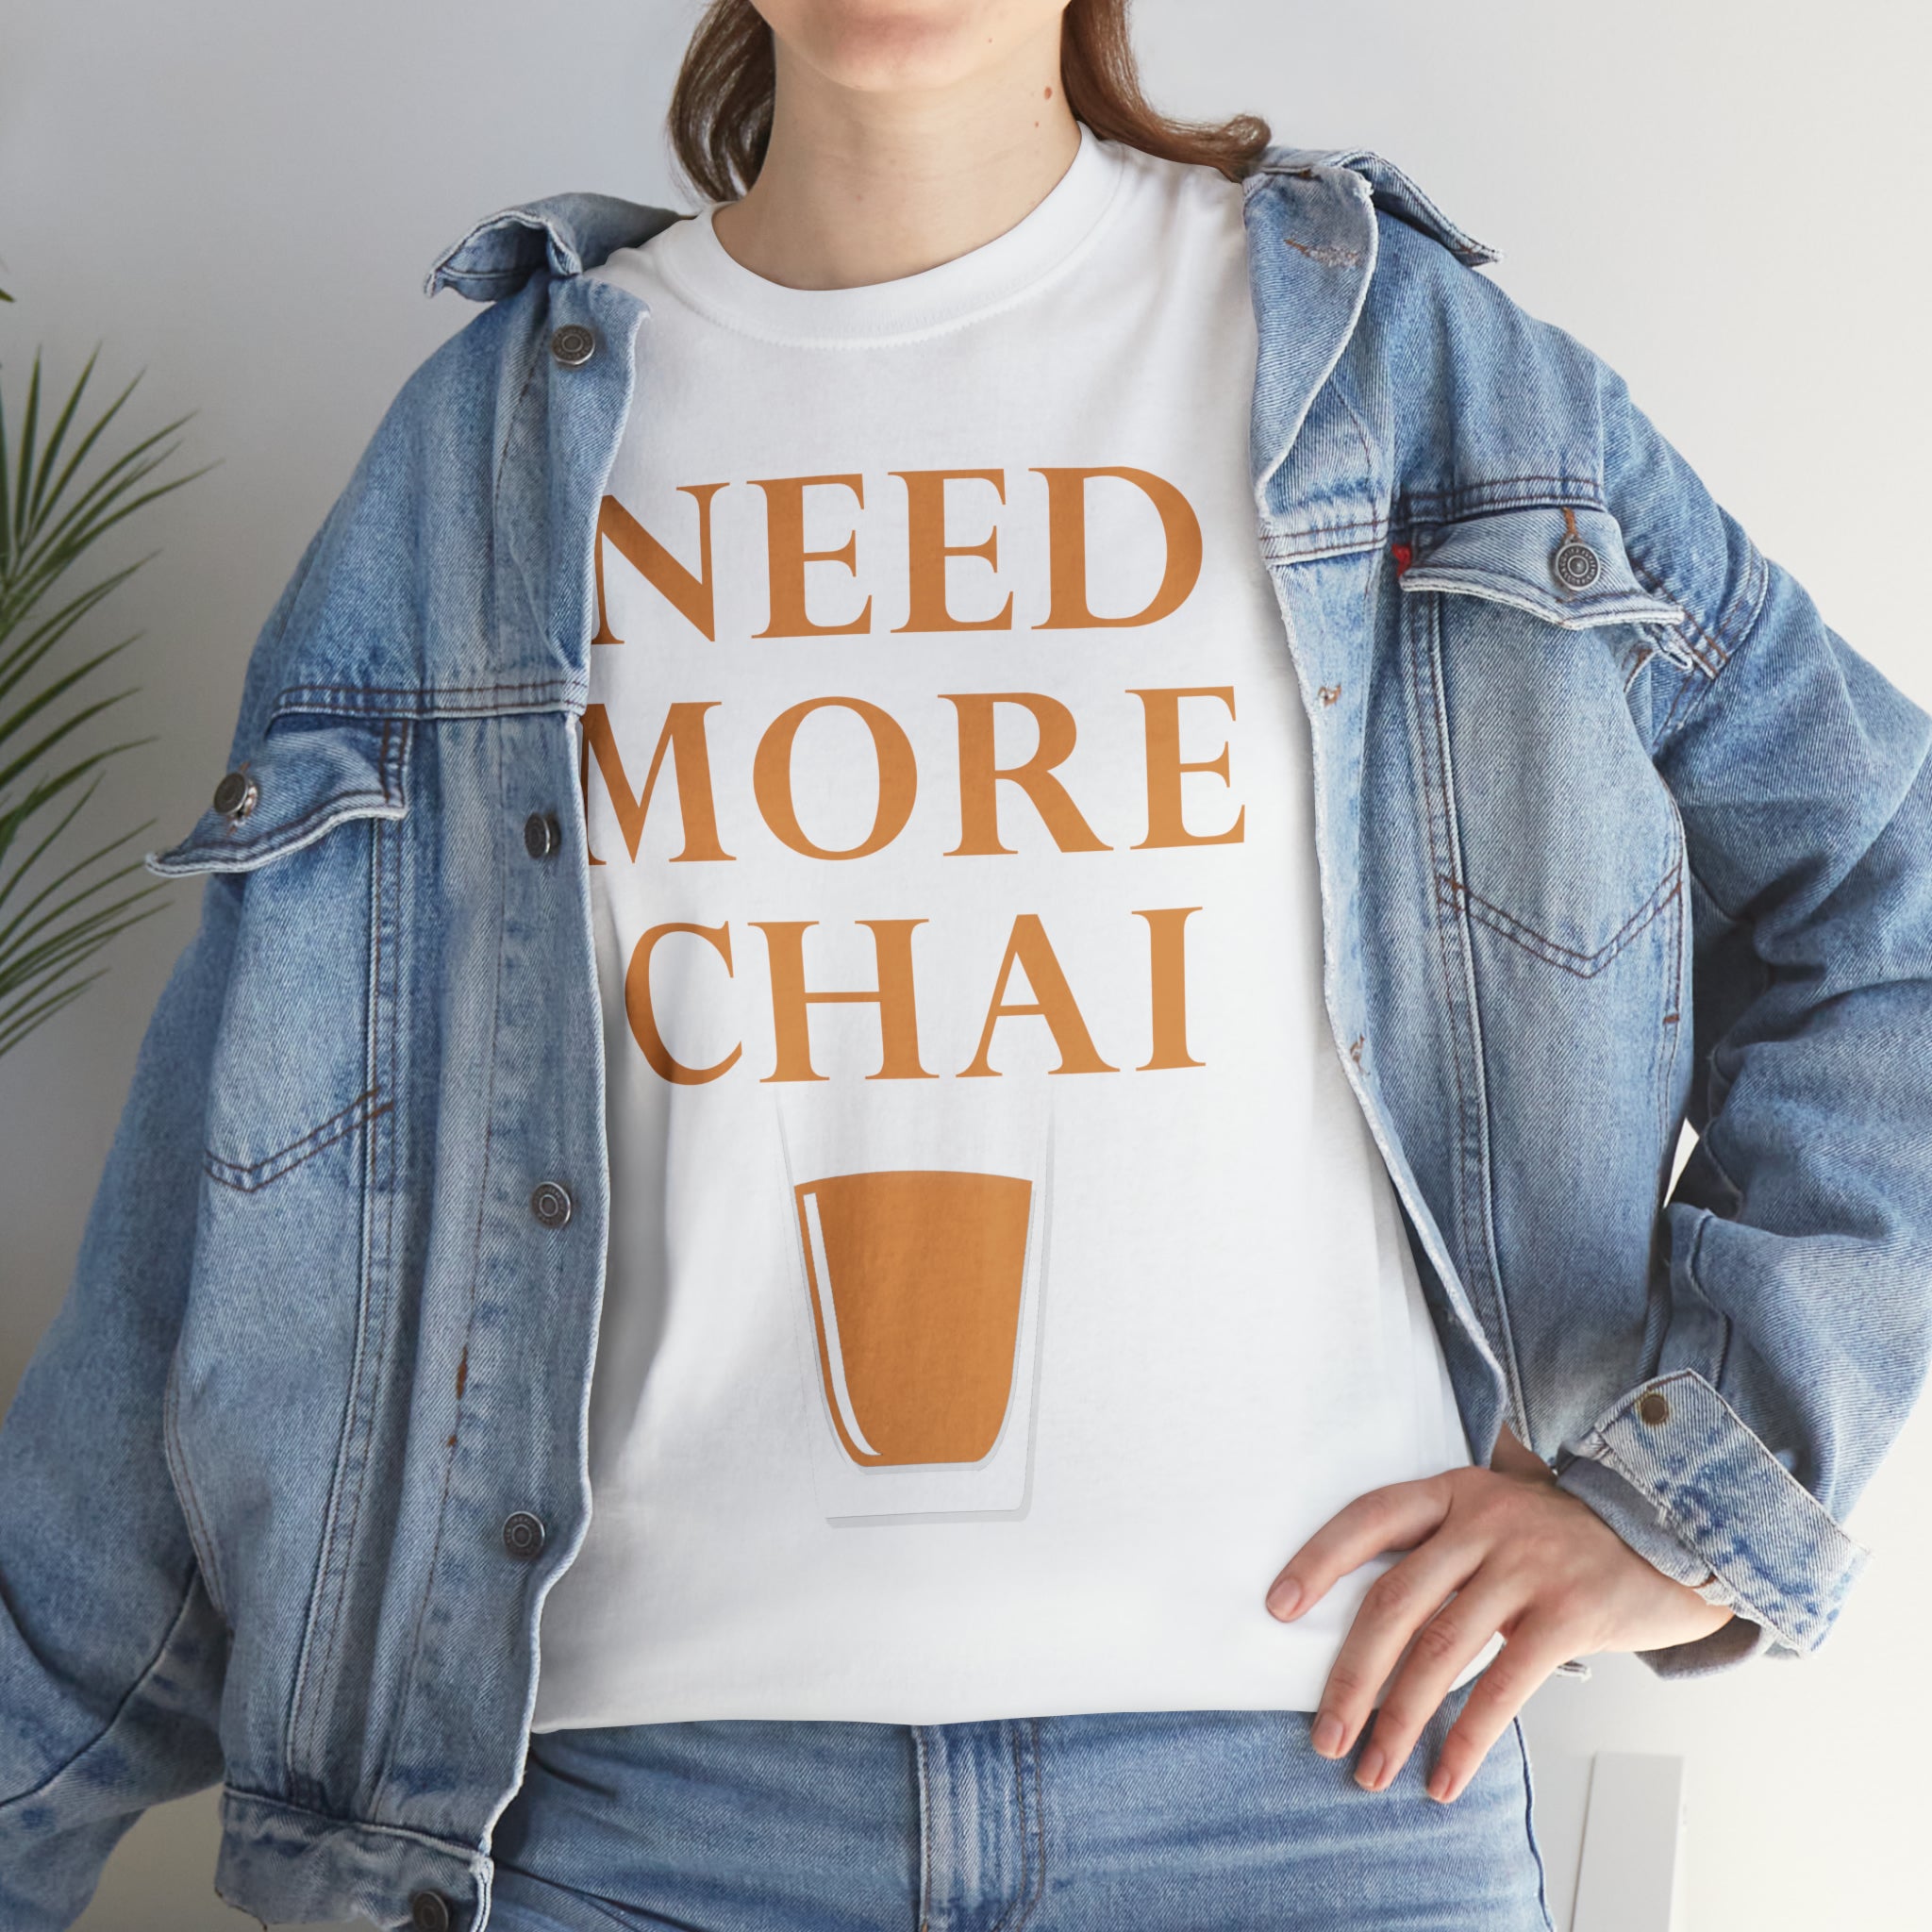 Need More Chai T-Shirt Design by C&C